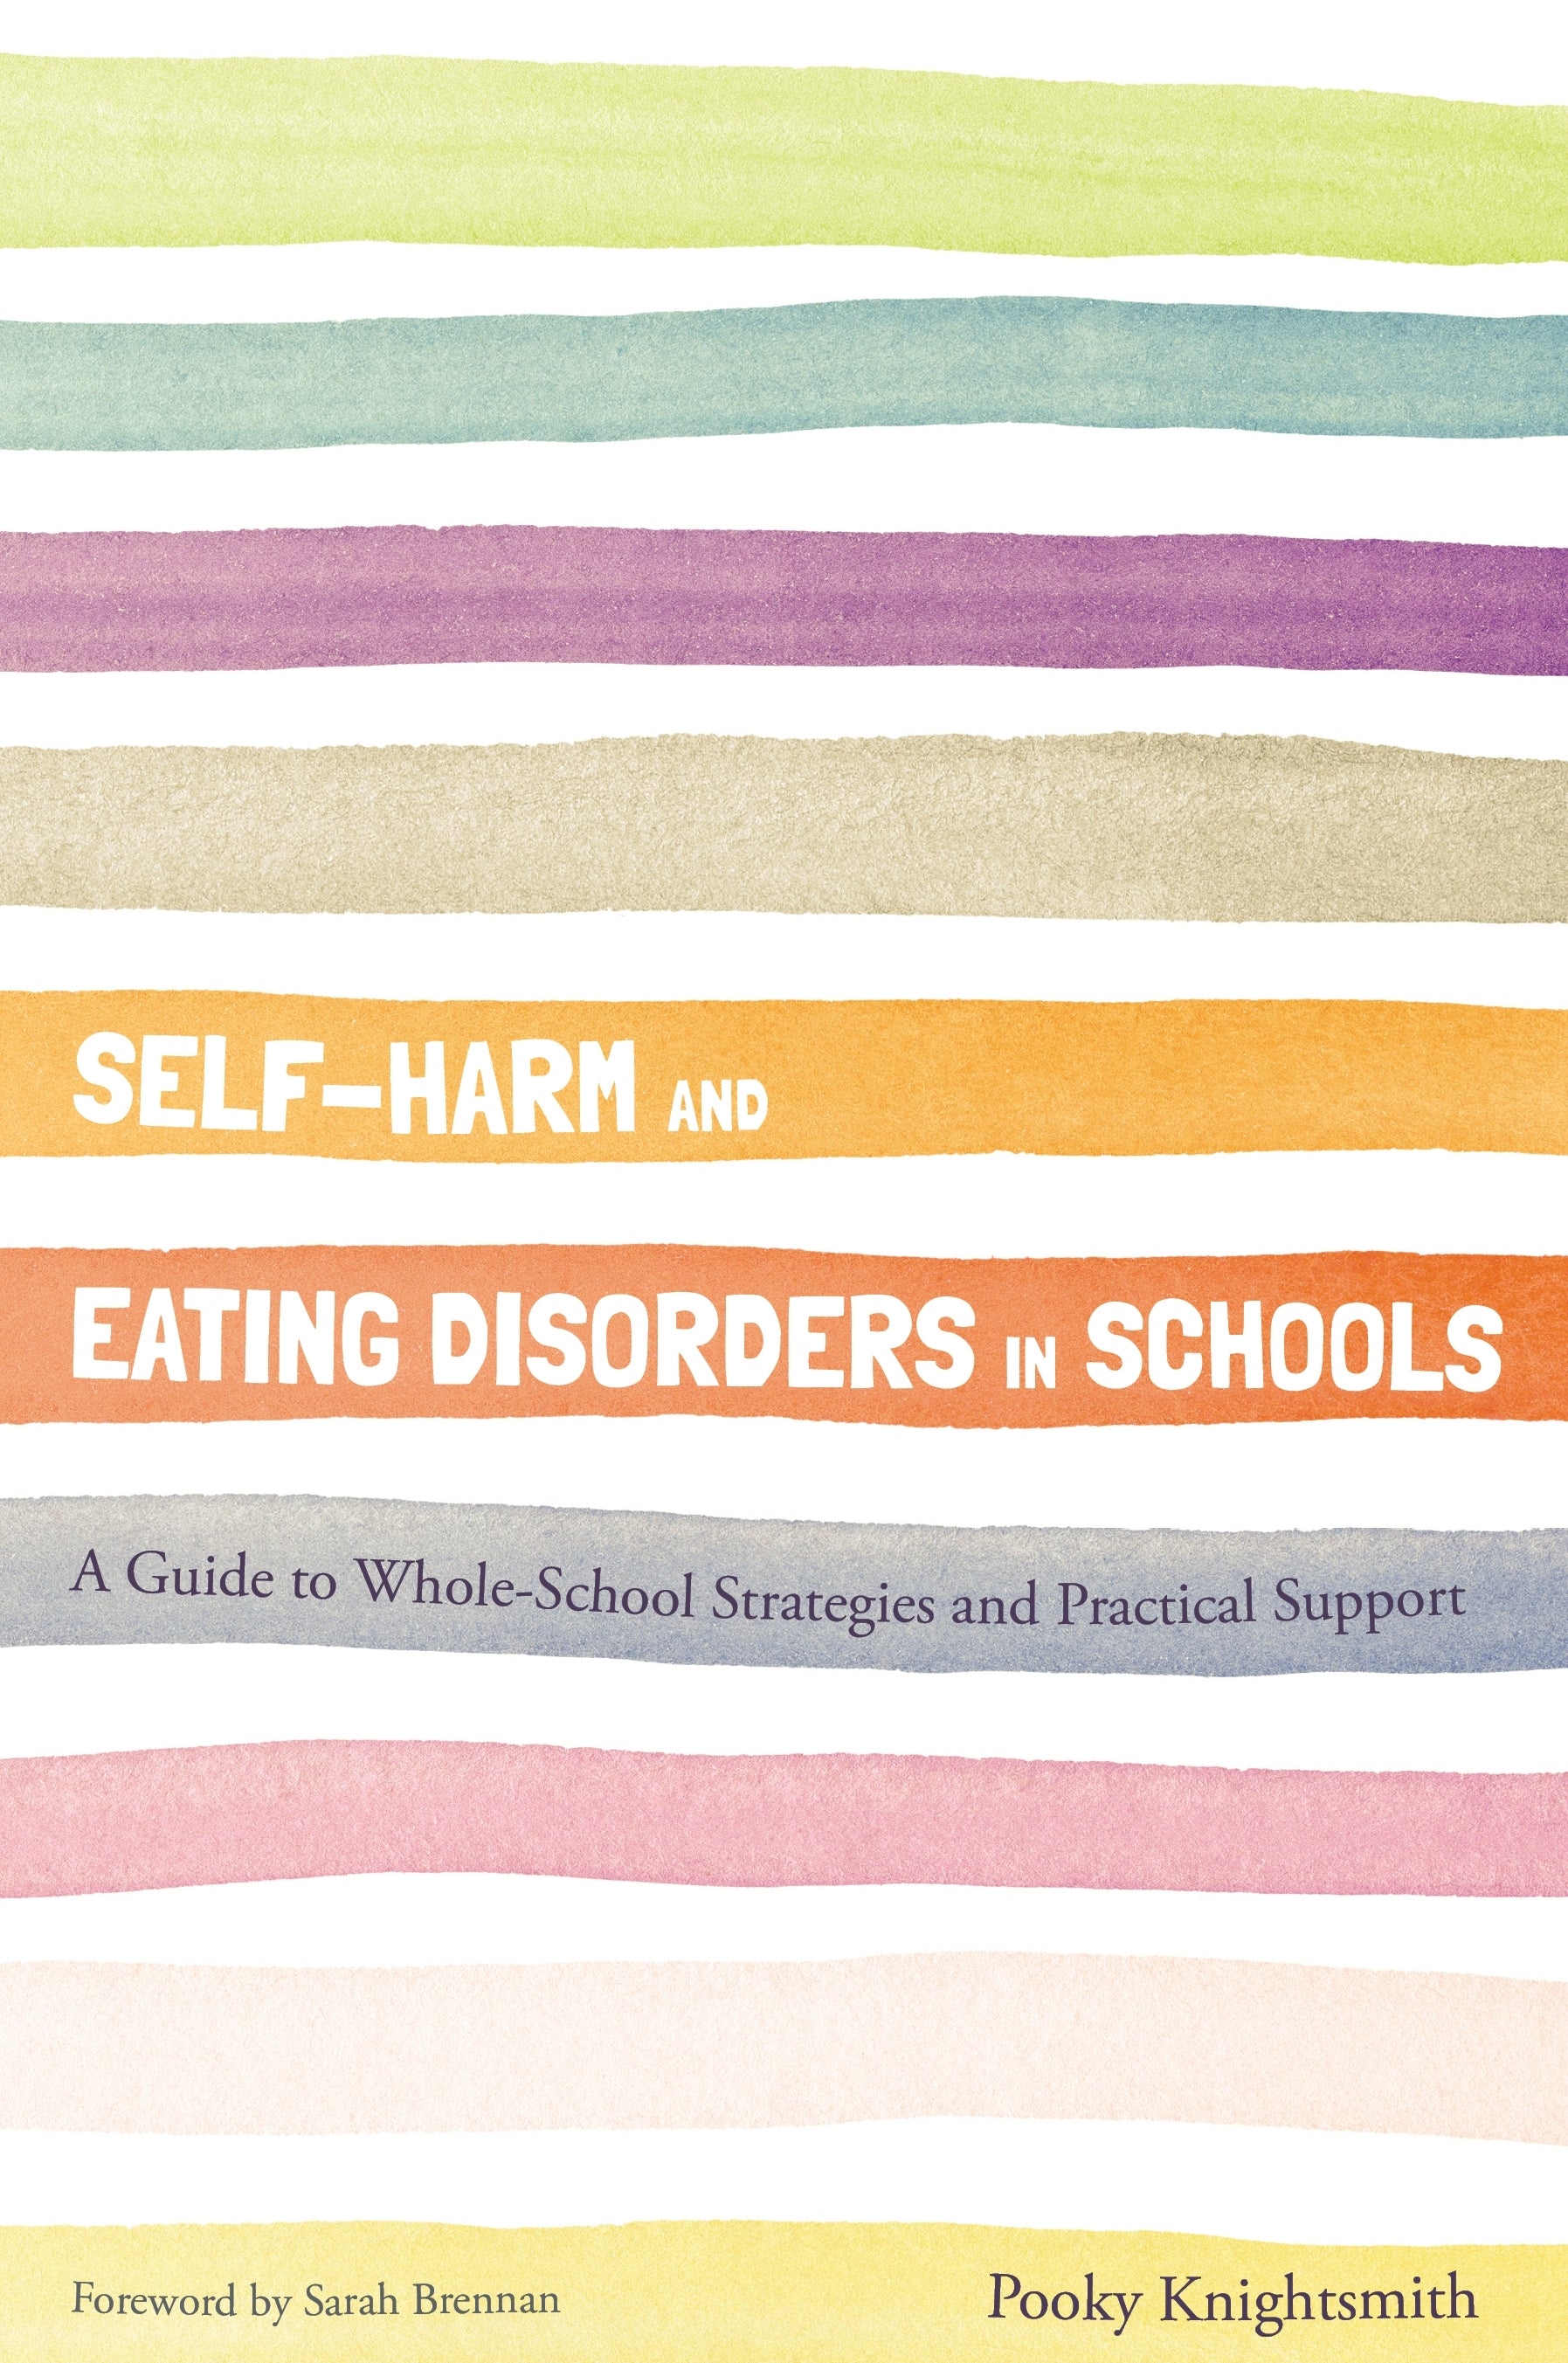 Self-Harm and Eating Disorders in Schools by Sarah Brennan, Pooky Knightsmith